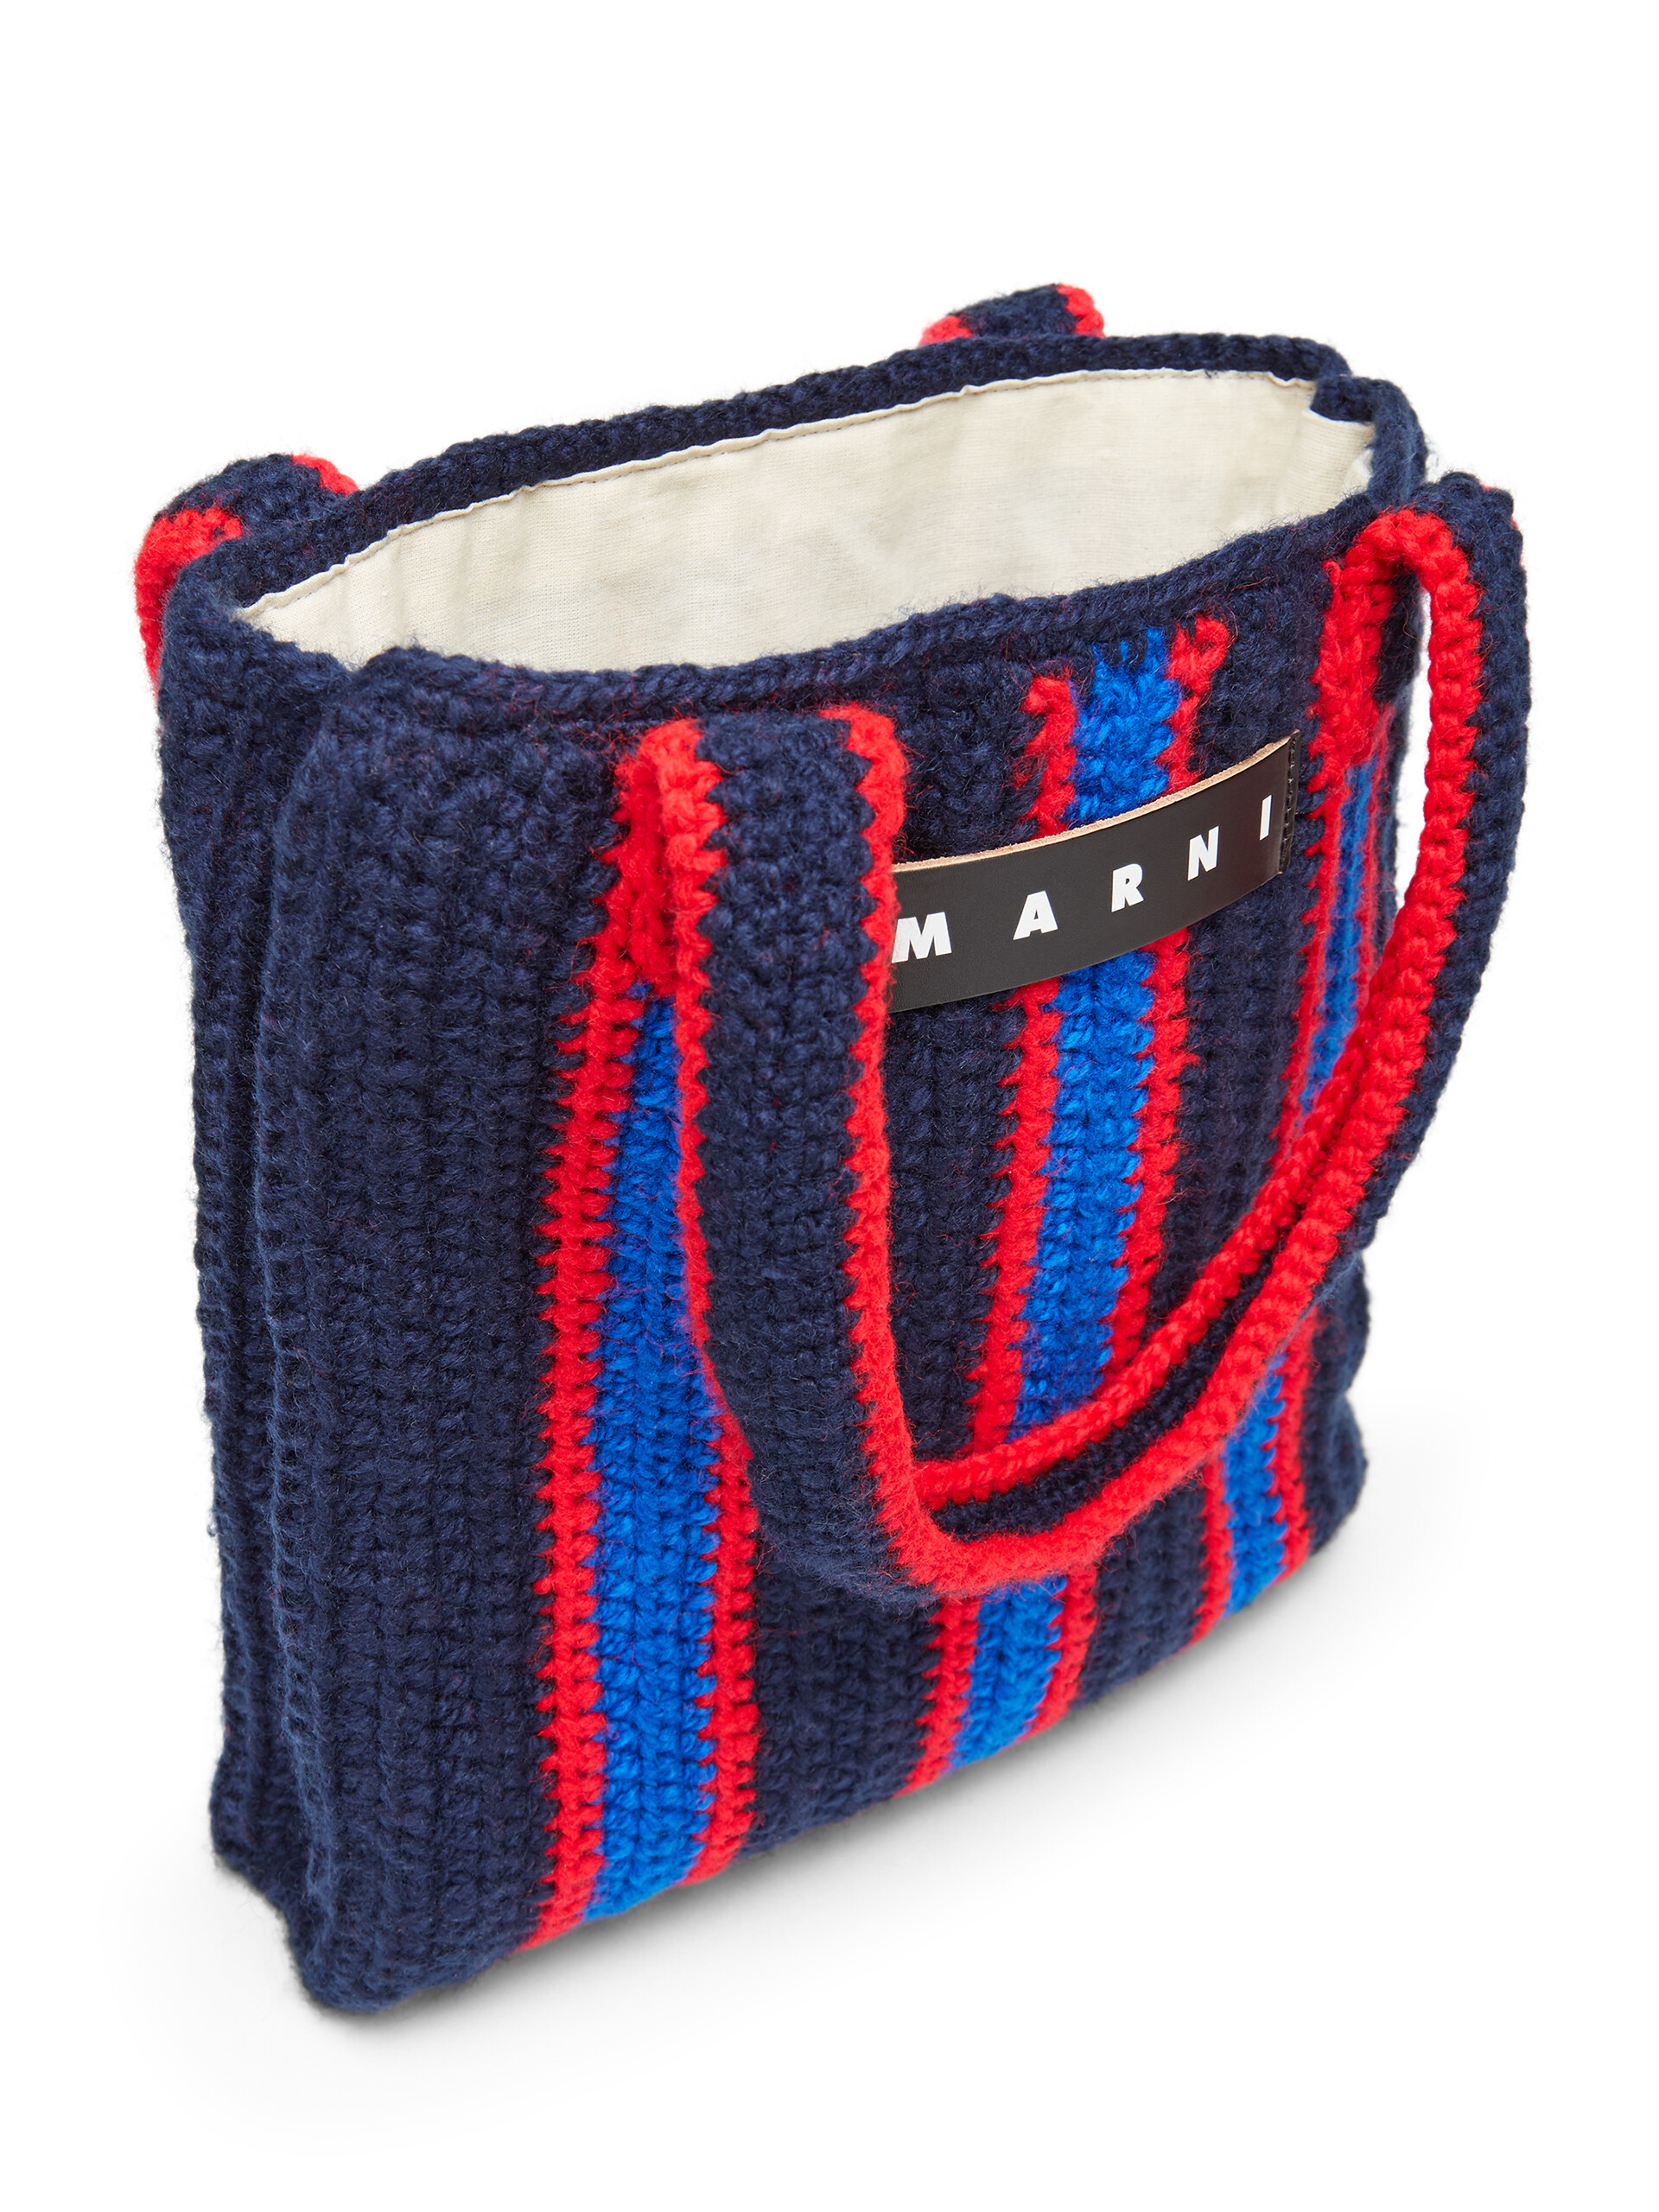 MARNI MARKET shopping bag in striped blue and red crochet - Shopping Bags - Image 4